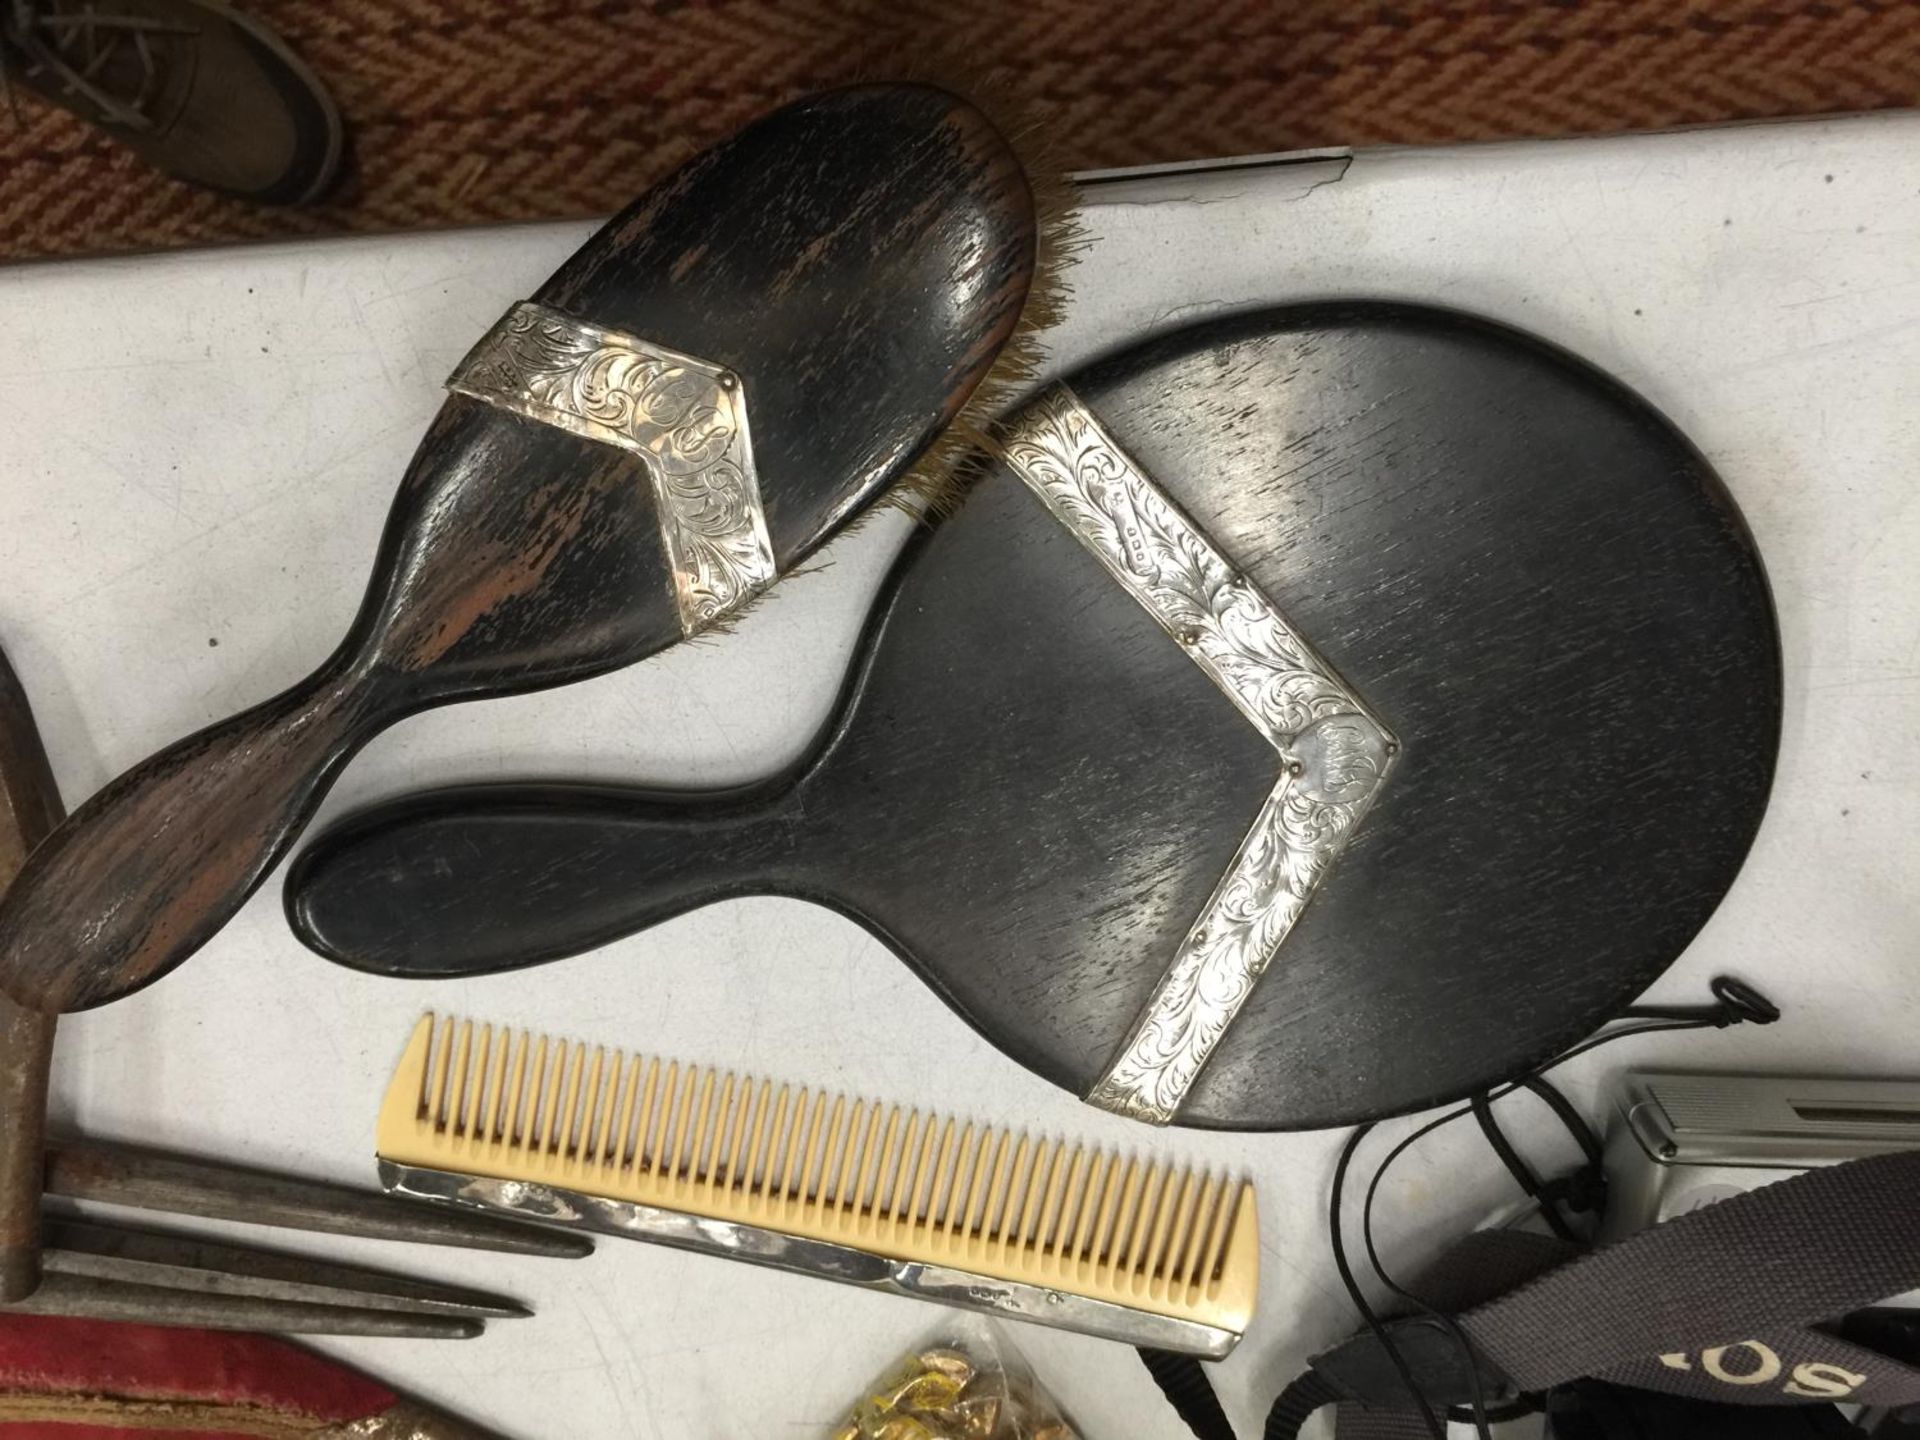 A BRUSH, COMB AND HAND MIRROR SET WITH WOODEN BACK AND SILVER DECORATION HALLMARKED FOR LONDON - Image 4 of 6